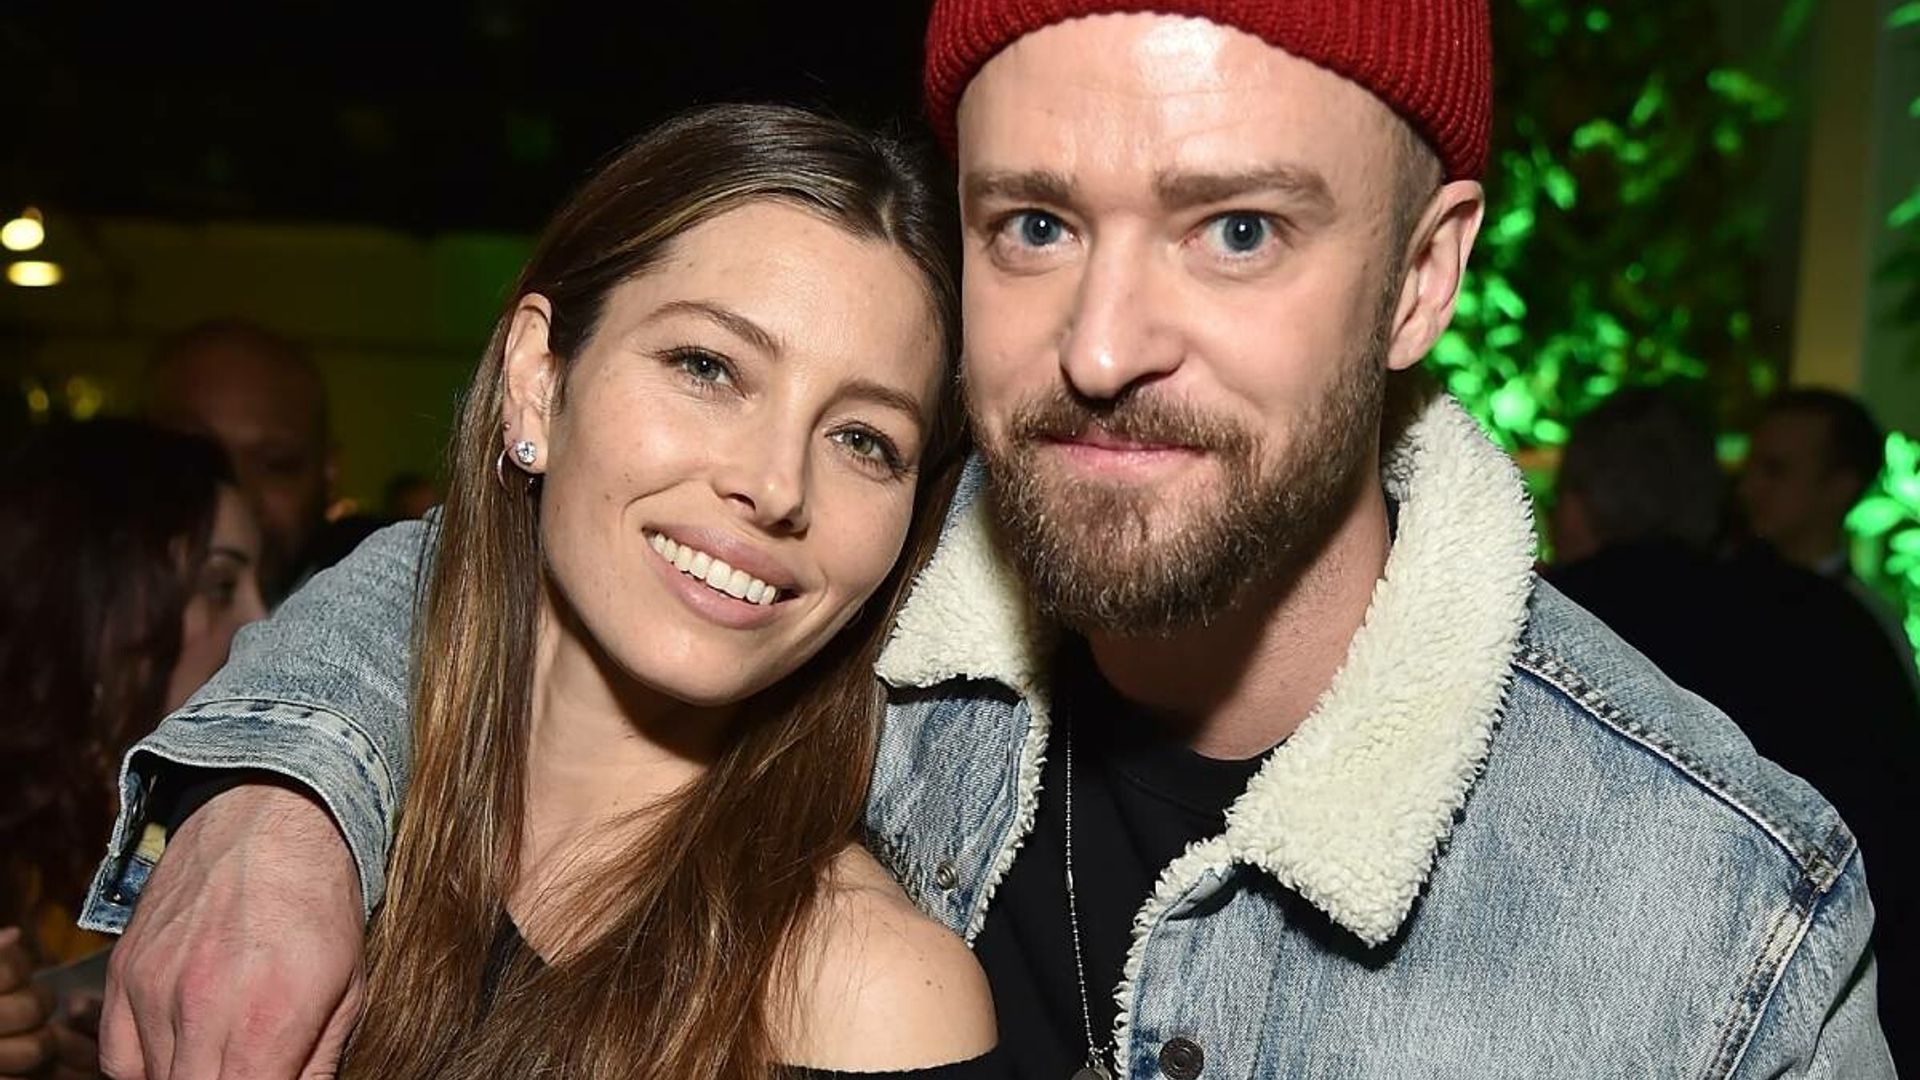 Justin Timberlake and Jessica Biel share first photos of son Phineas in adorable Halloween costume